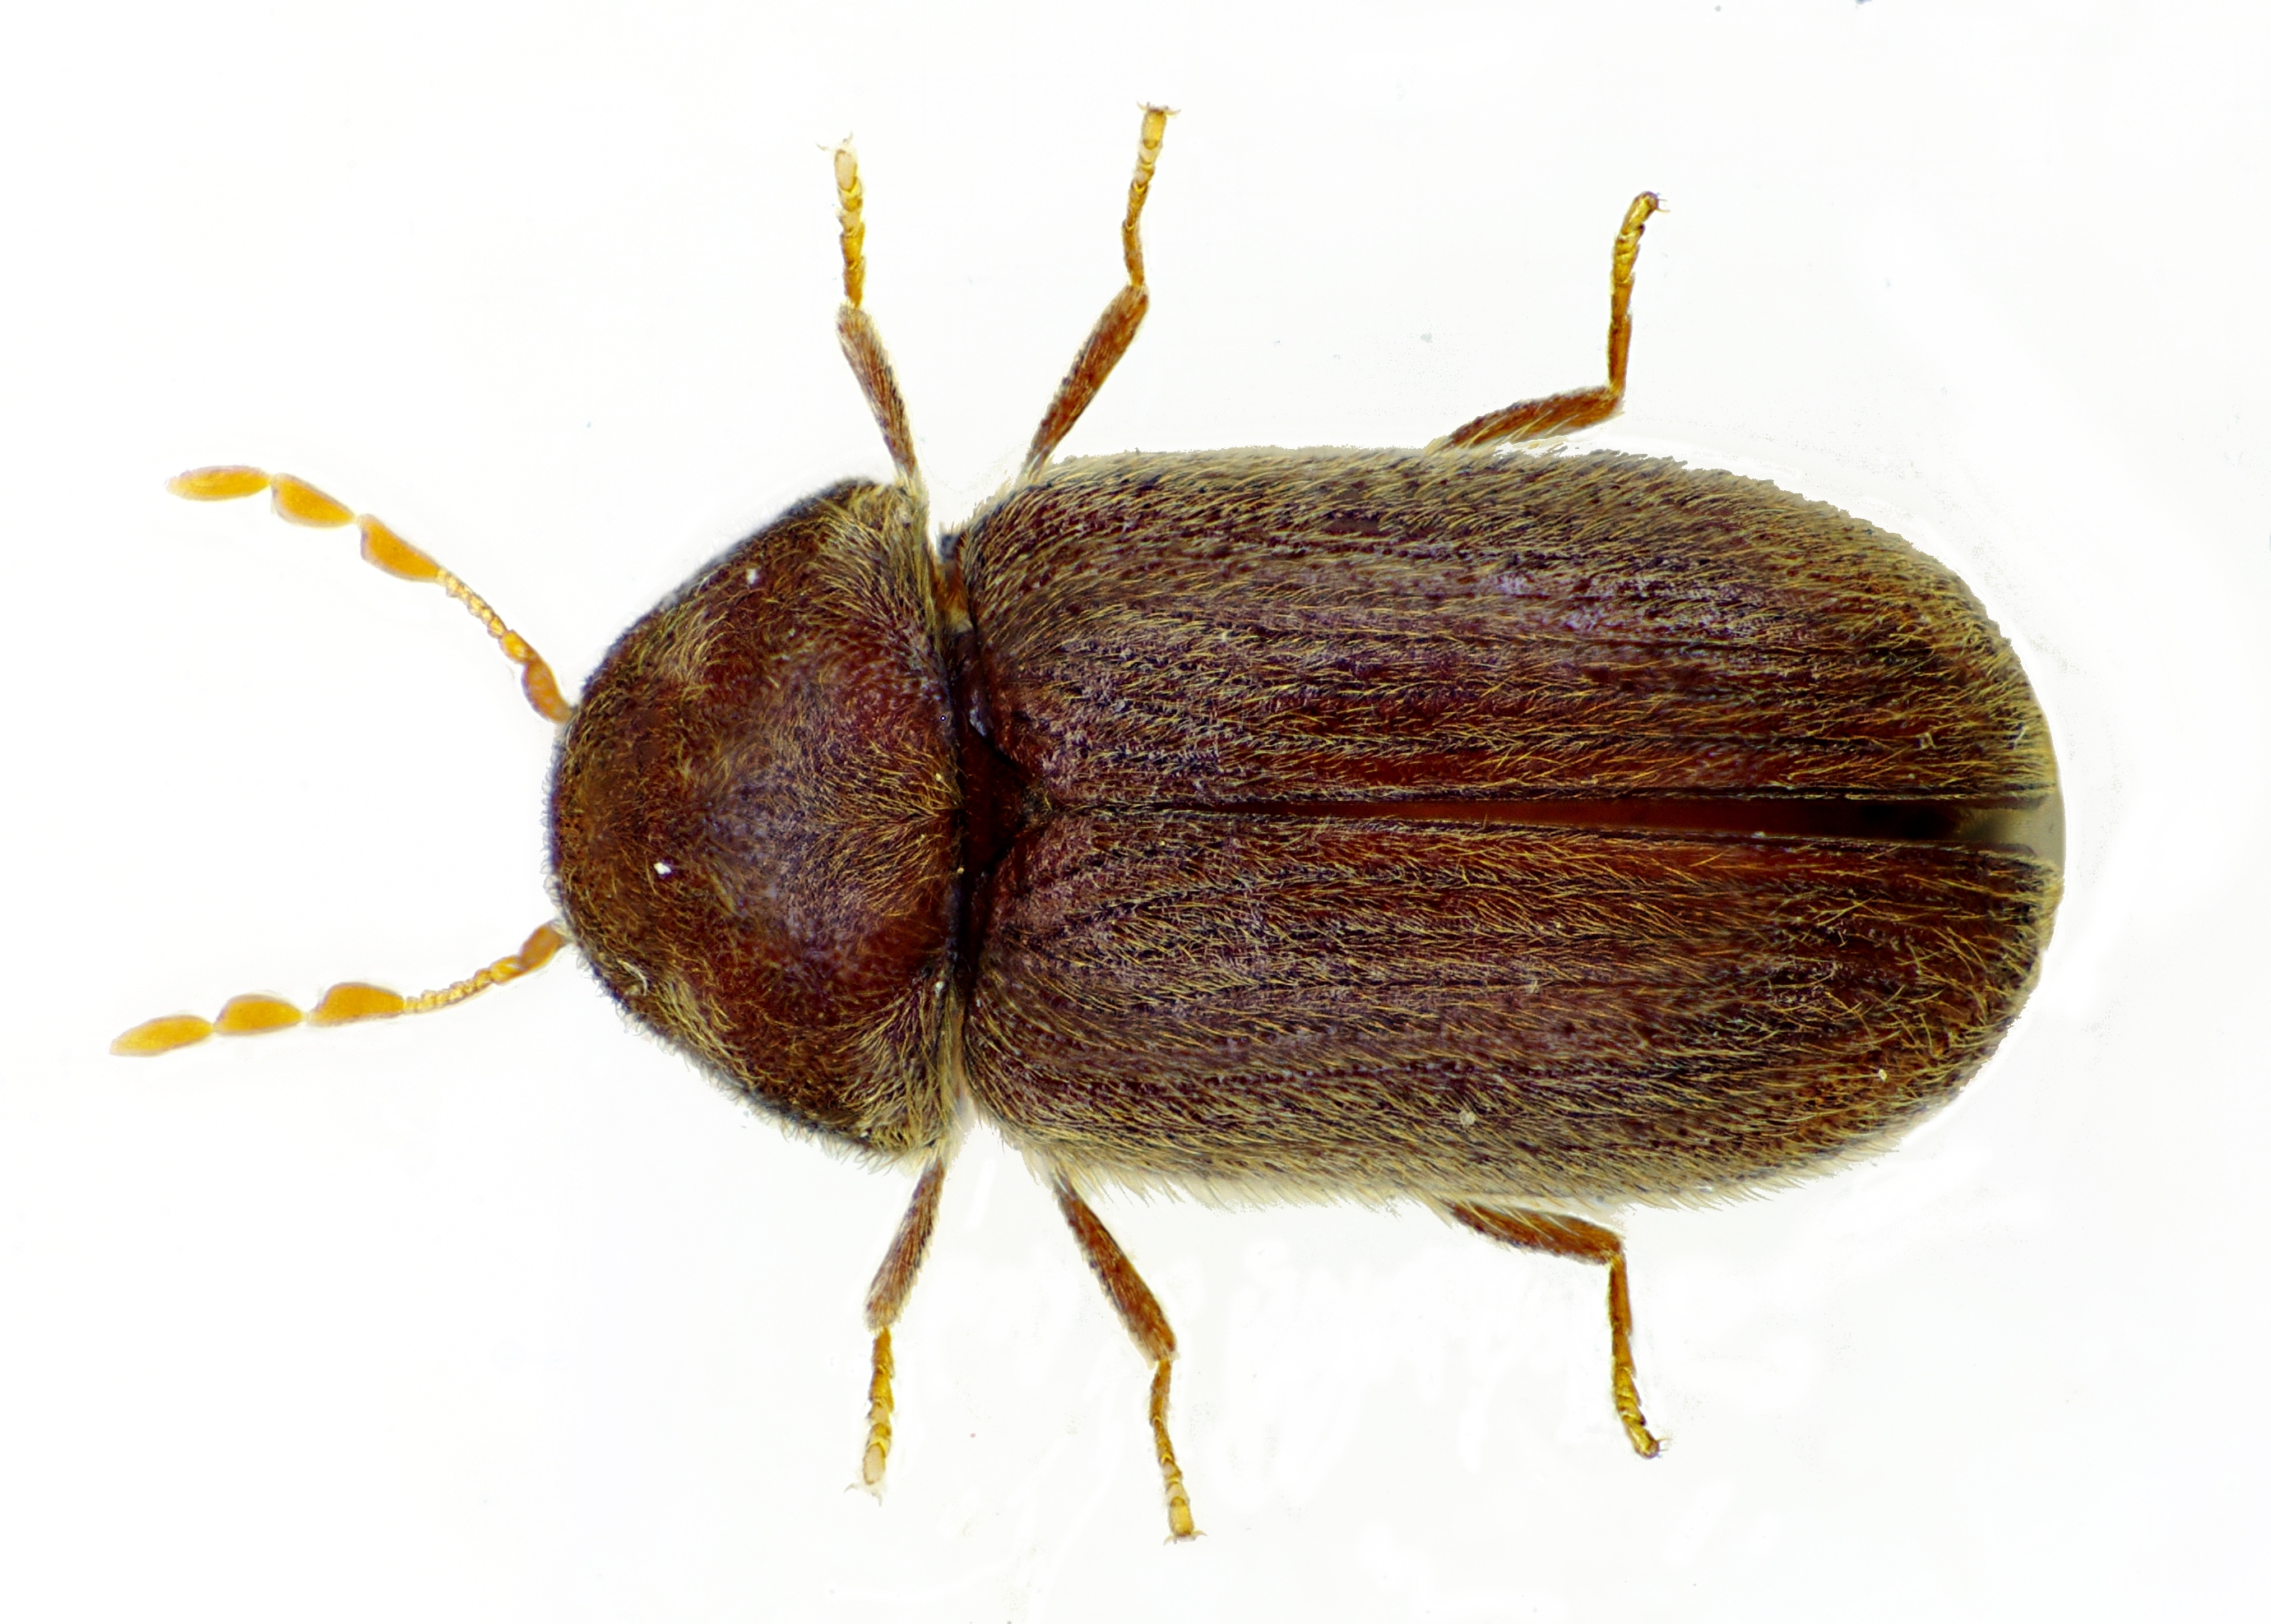 How to Get Rid of Drugstore Beetle Infestations